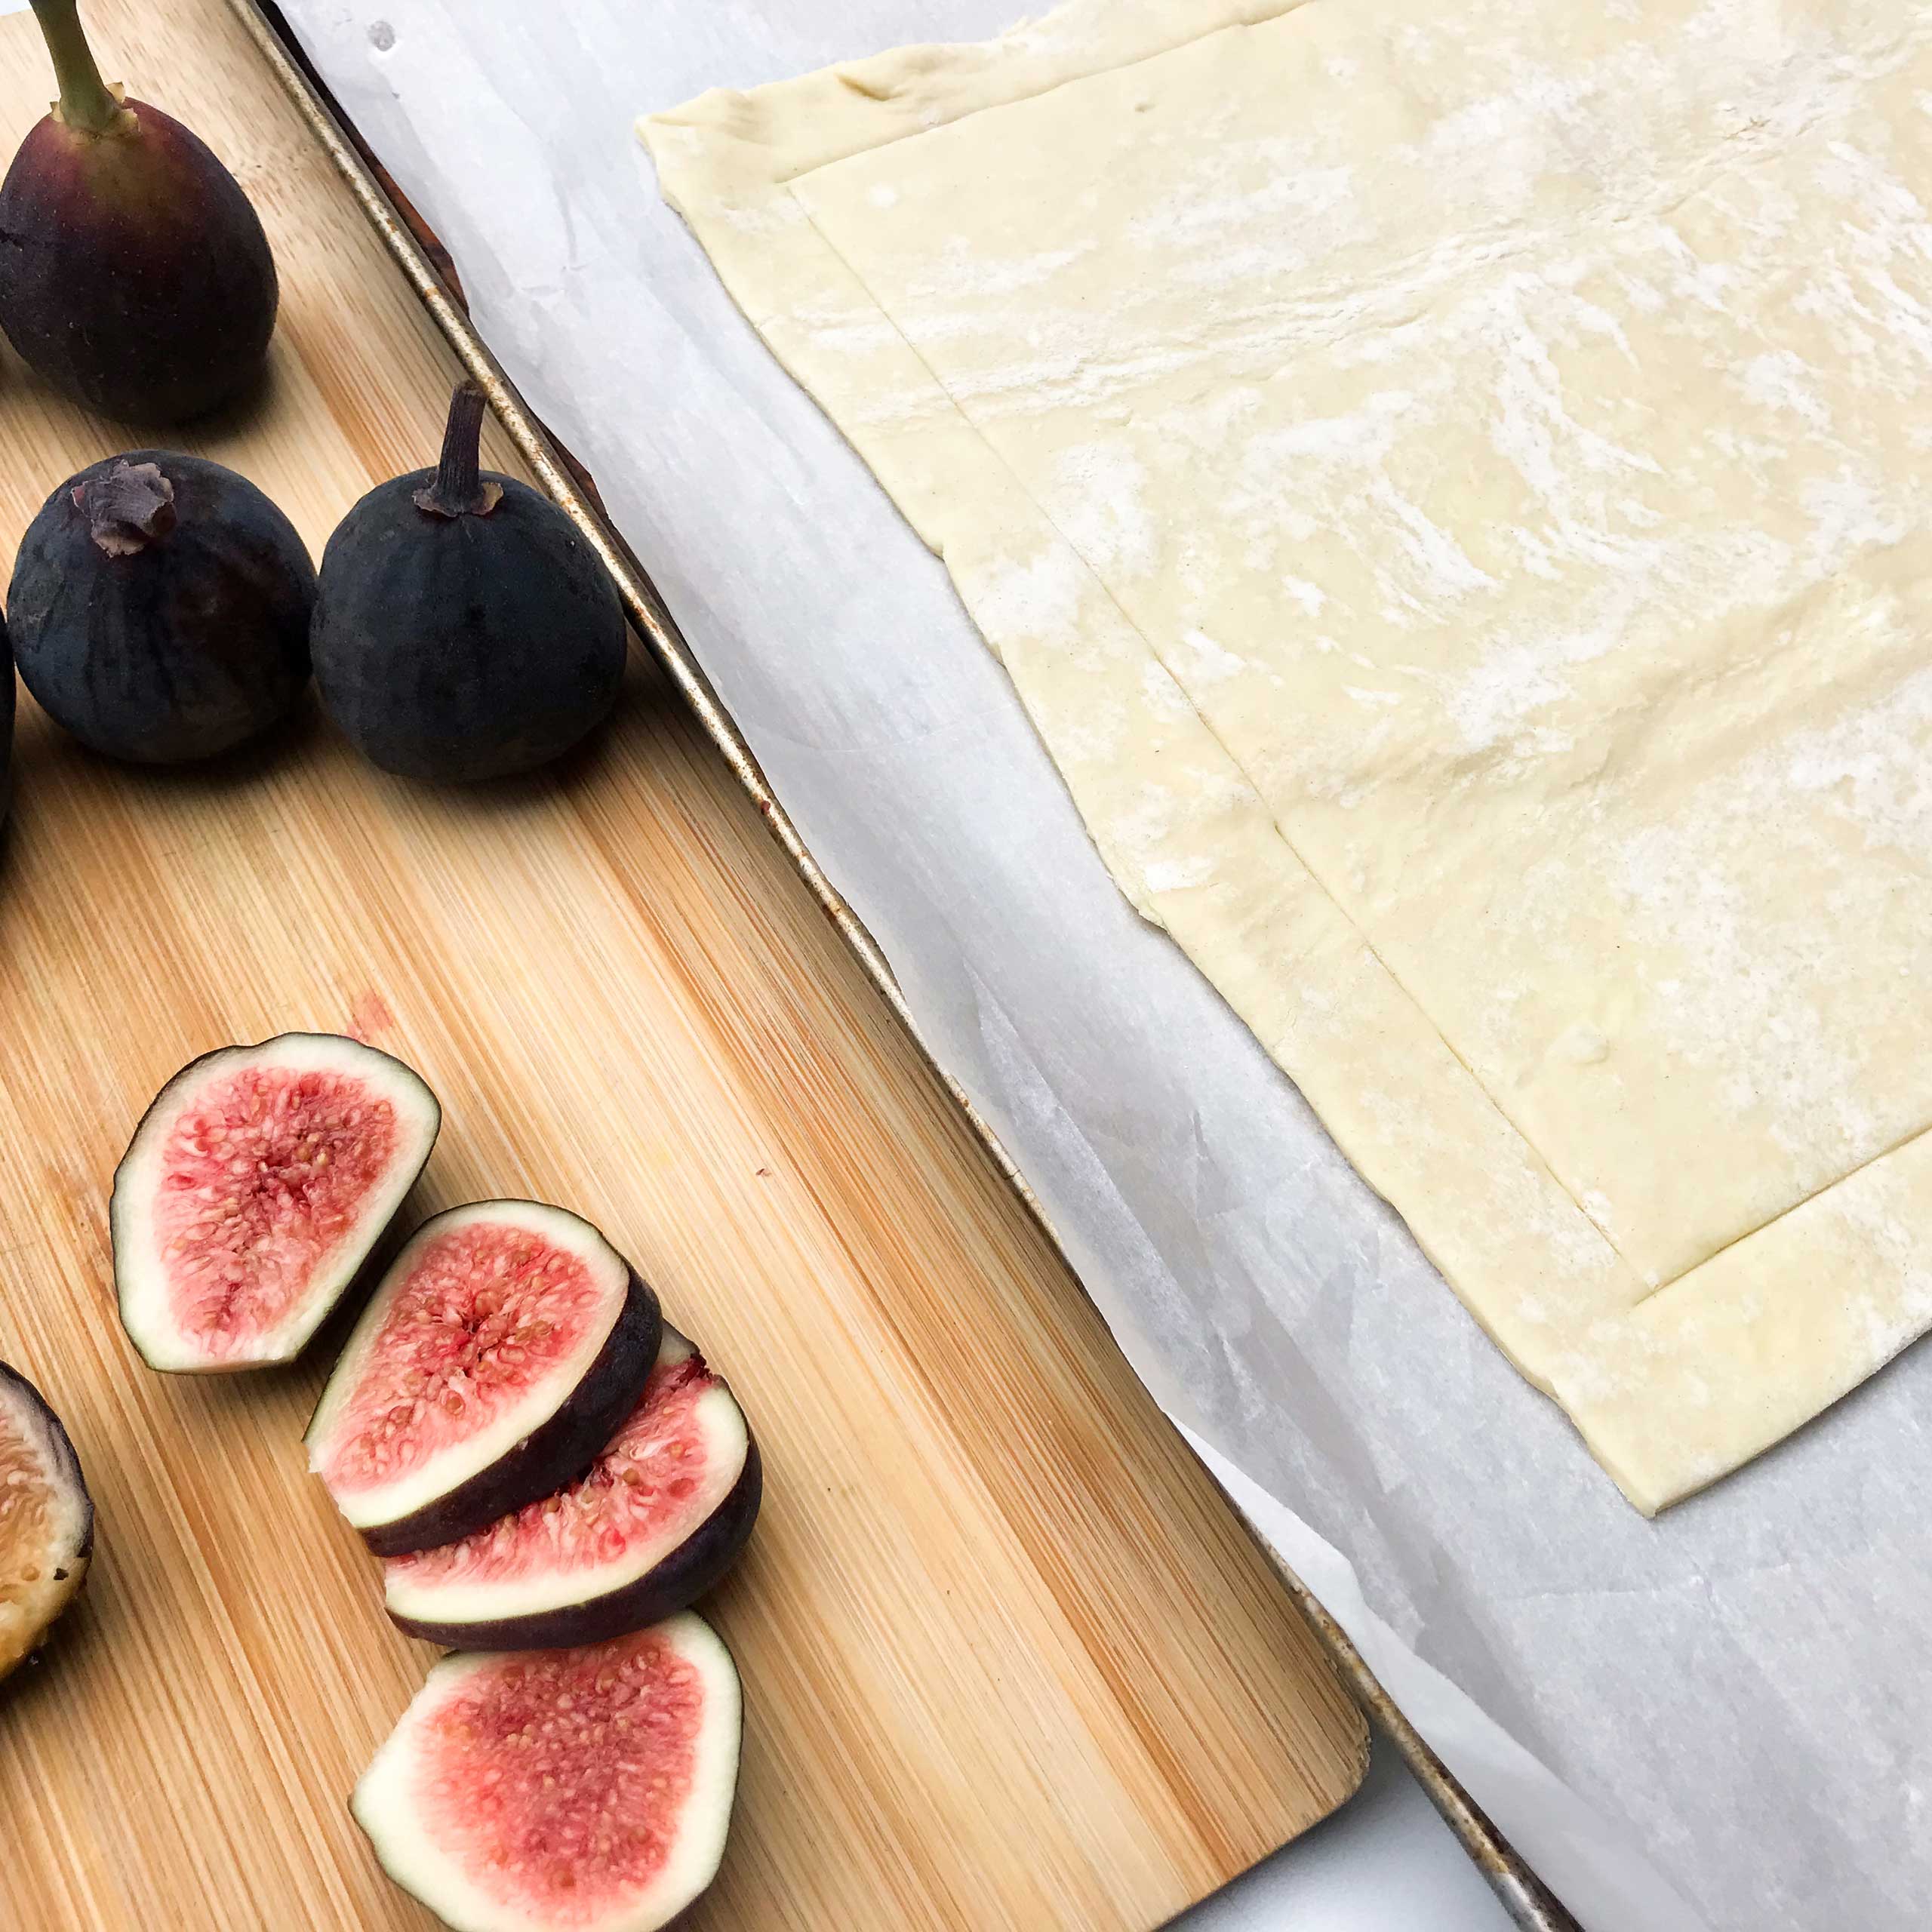 rolled out dough next to cut figs.